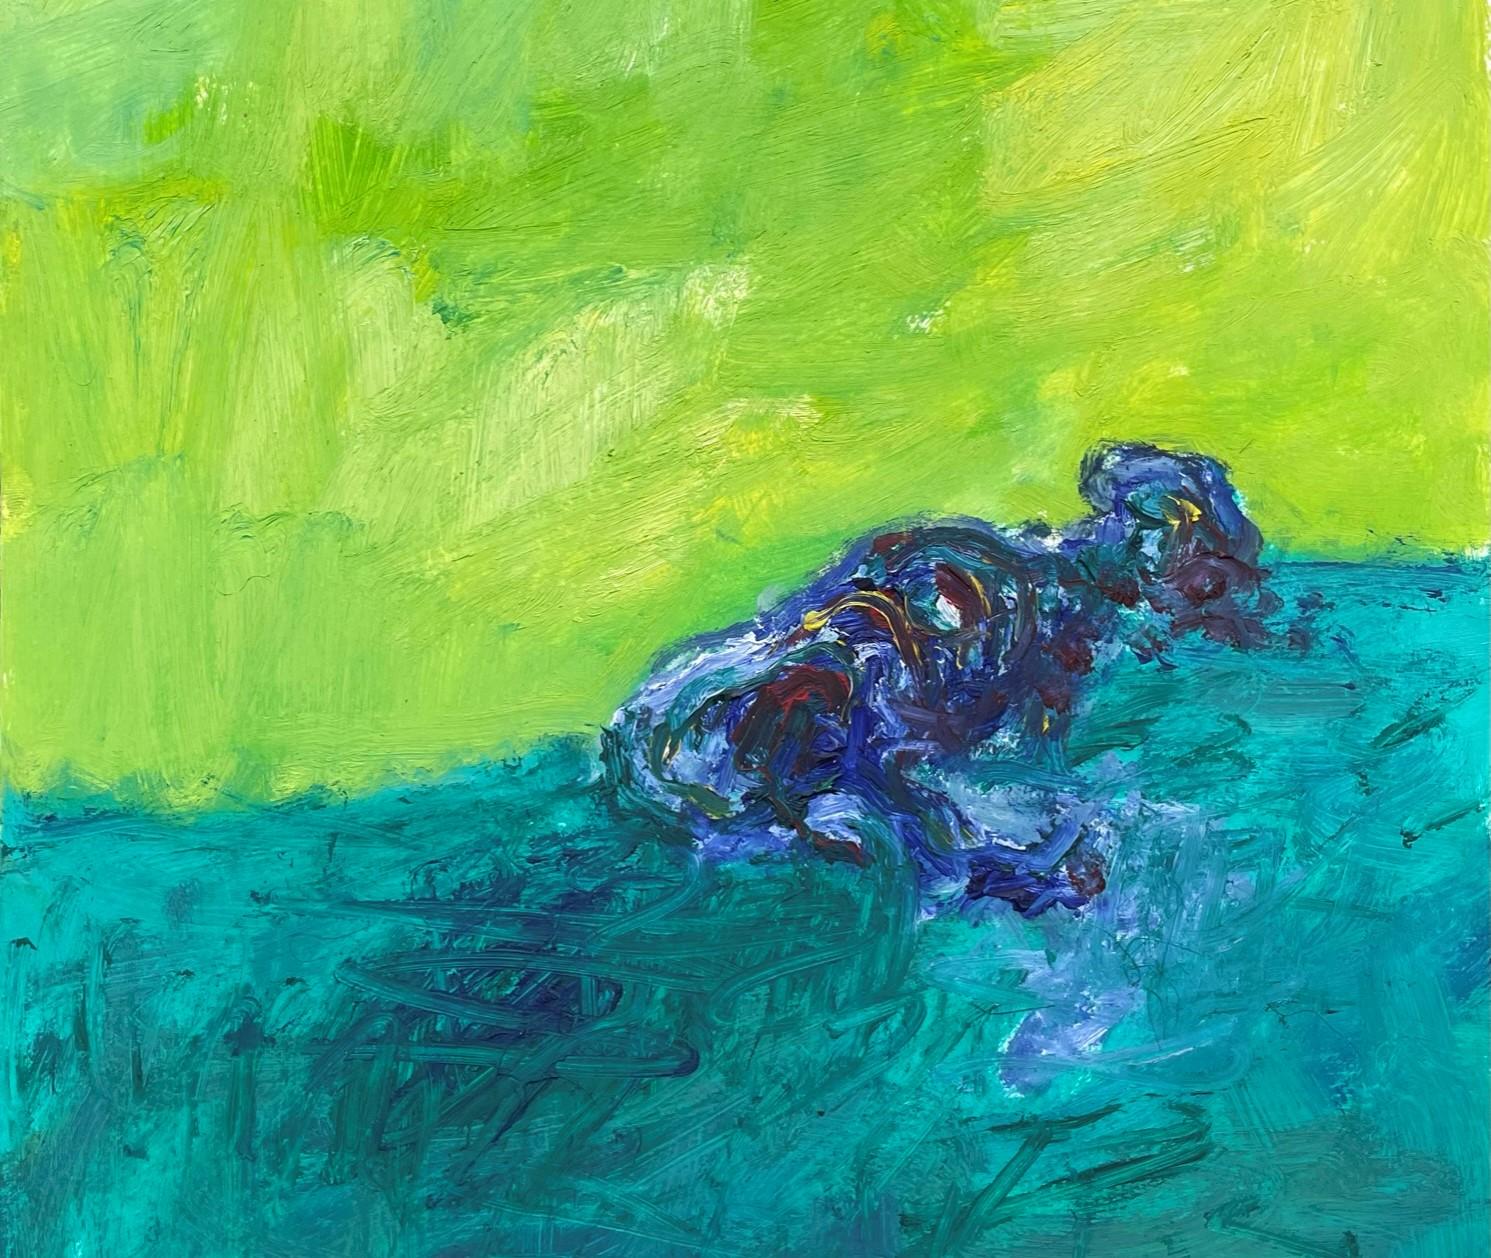 Remains (Body in the Field 13), 2022
oil on paper (signed on reverse)
16 17/32 H x 11 13/16 W in.
42 H x 30 W cm

Zsolt Berszán embodies in his works the dissolution of the human body through the prism of the fragment, the body in pieces, and the